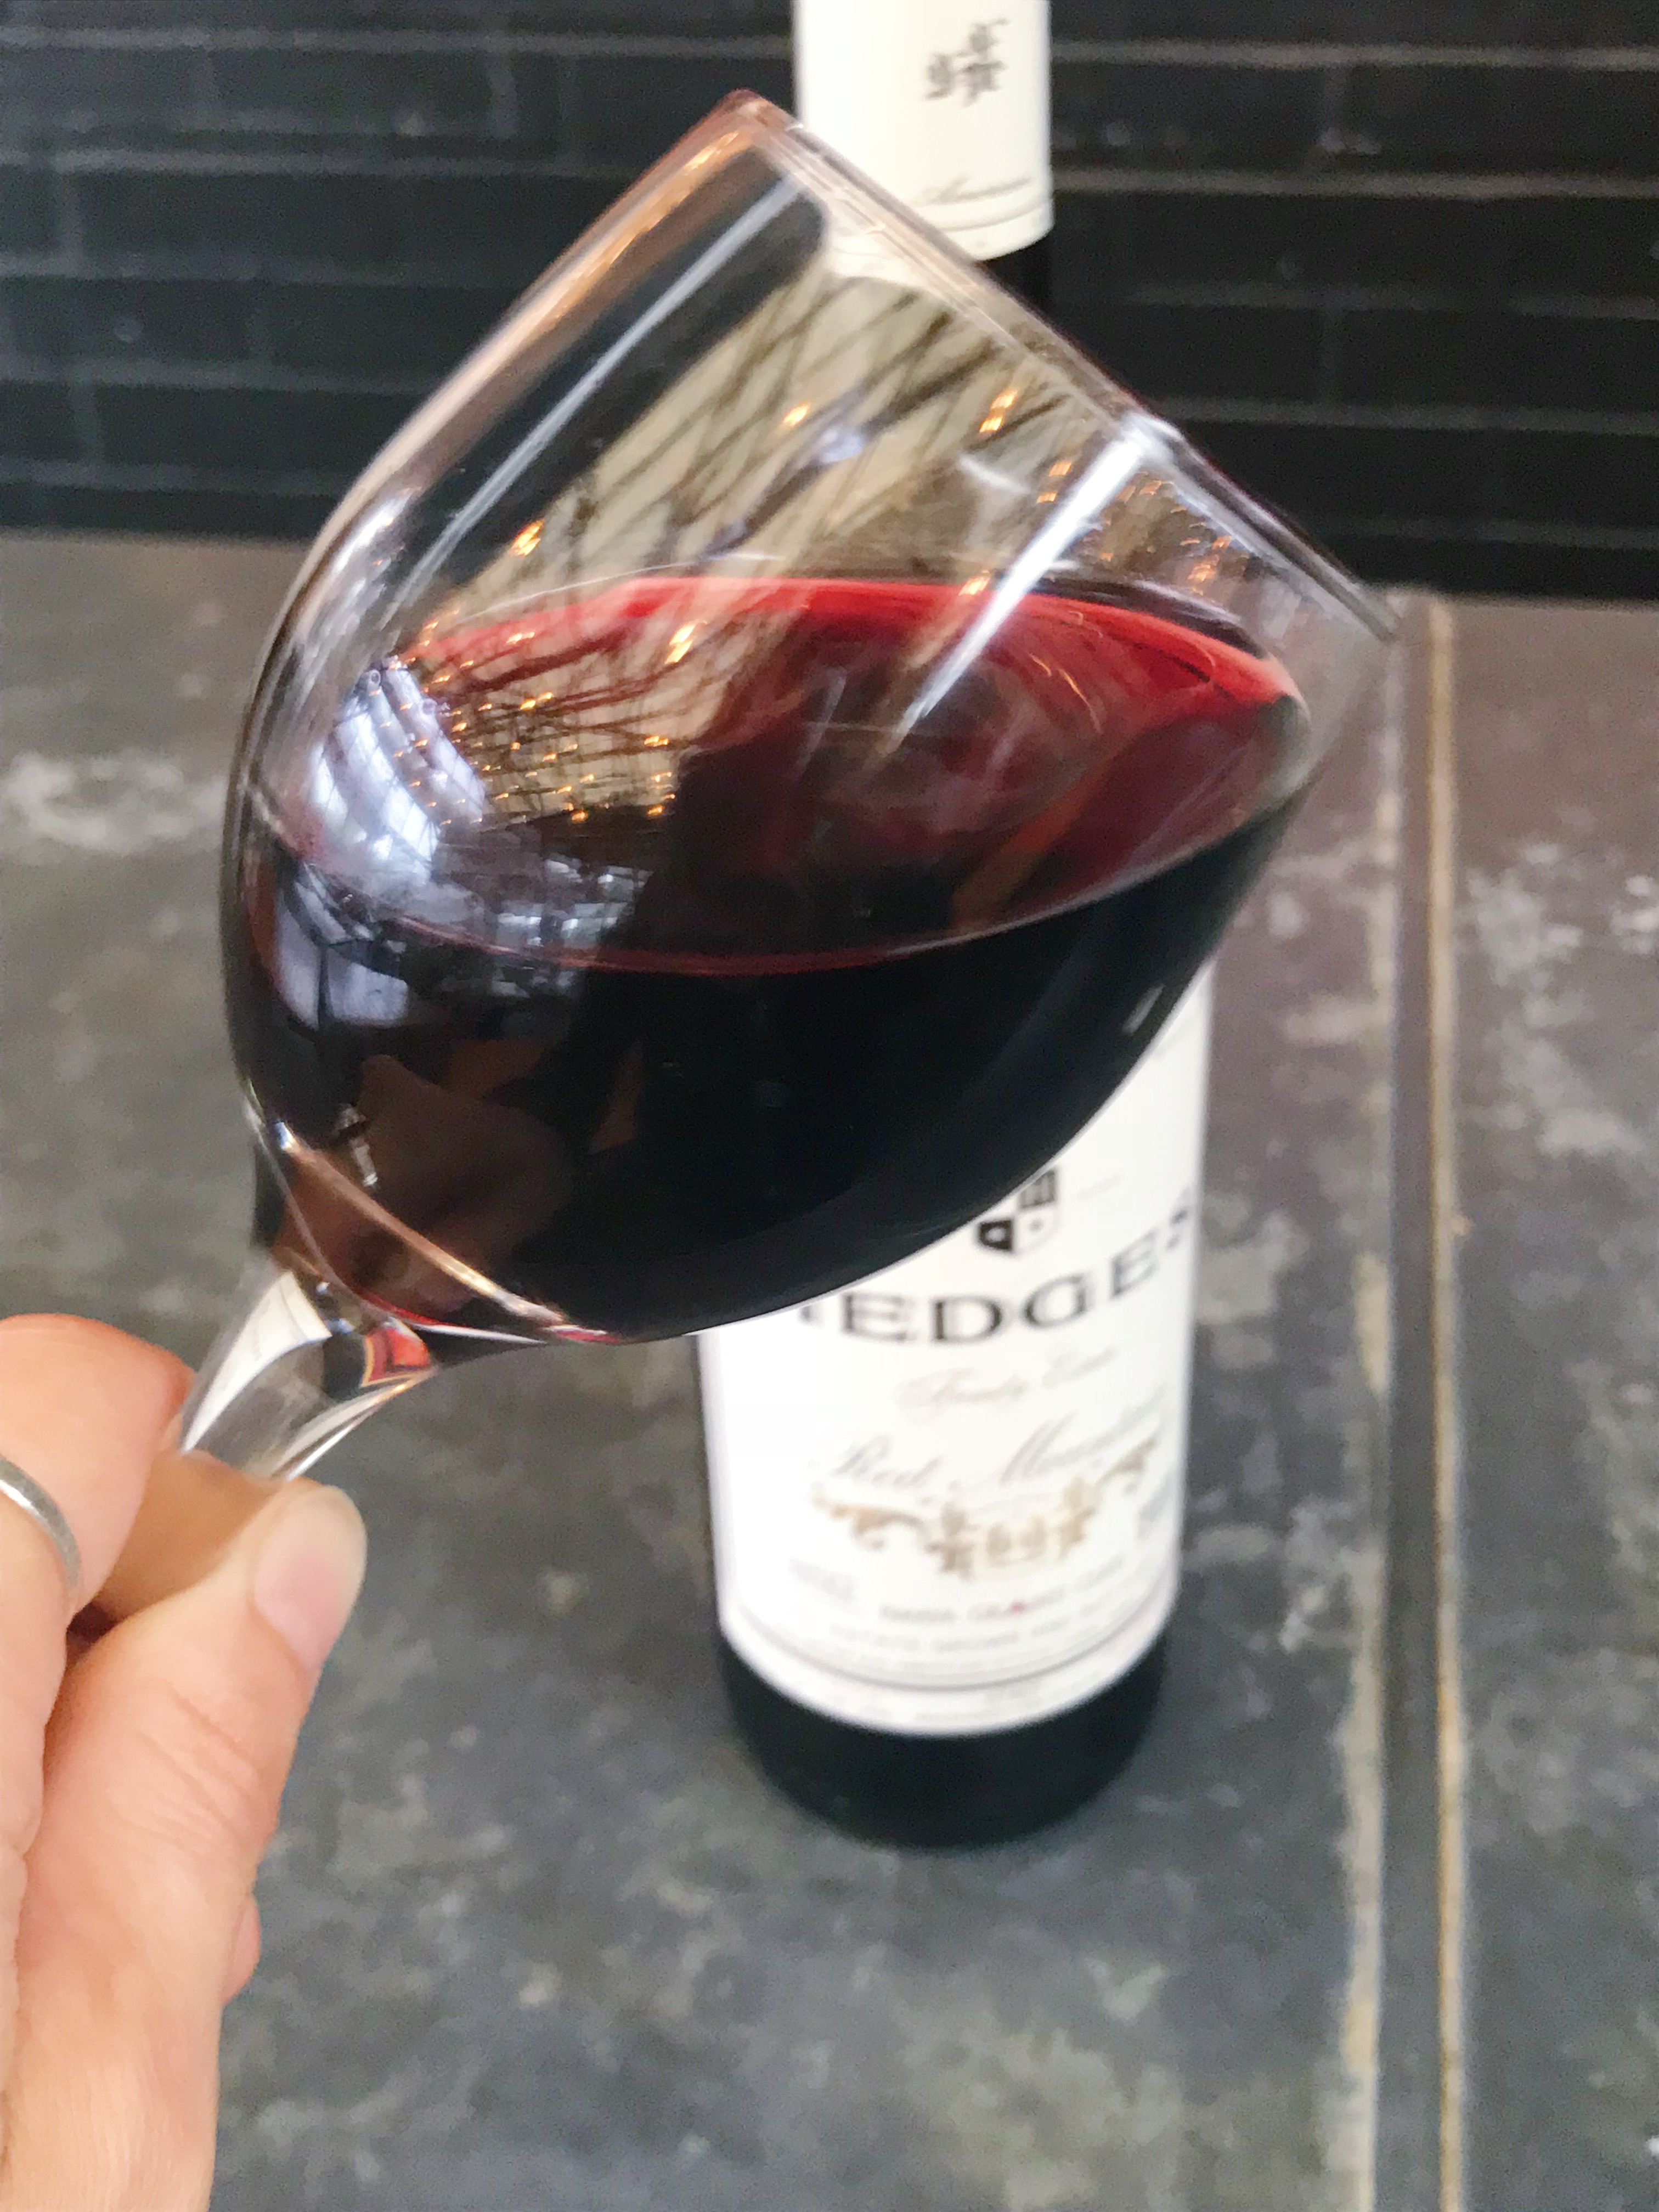 A bottle and a glass of the Hedges Family Estate Red Mountain Cabernet Blend.